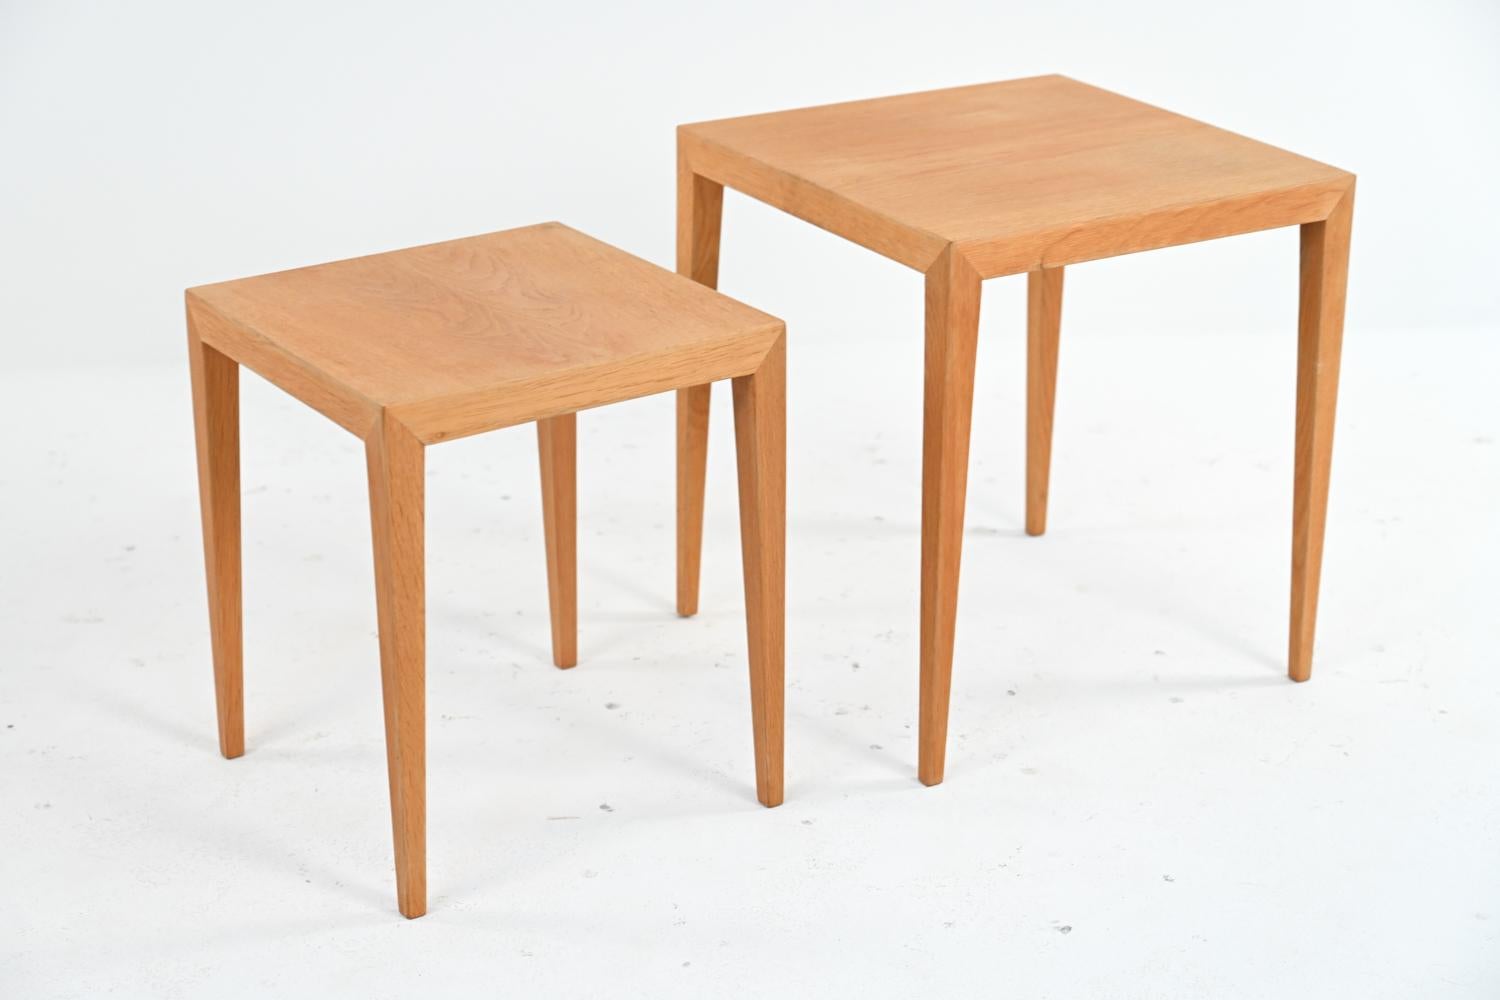 A set of two Danish mid-century nesting tables in blonde oak wood, designed by Severin Hansen for Haslev. These nesting side tables featuring Hansen's classic modern minimalist design with sleek tapered legs. One retains Danish control label